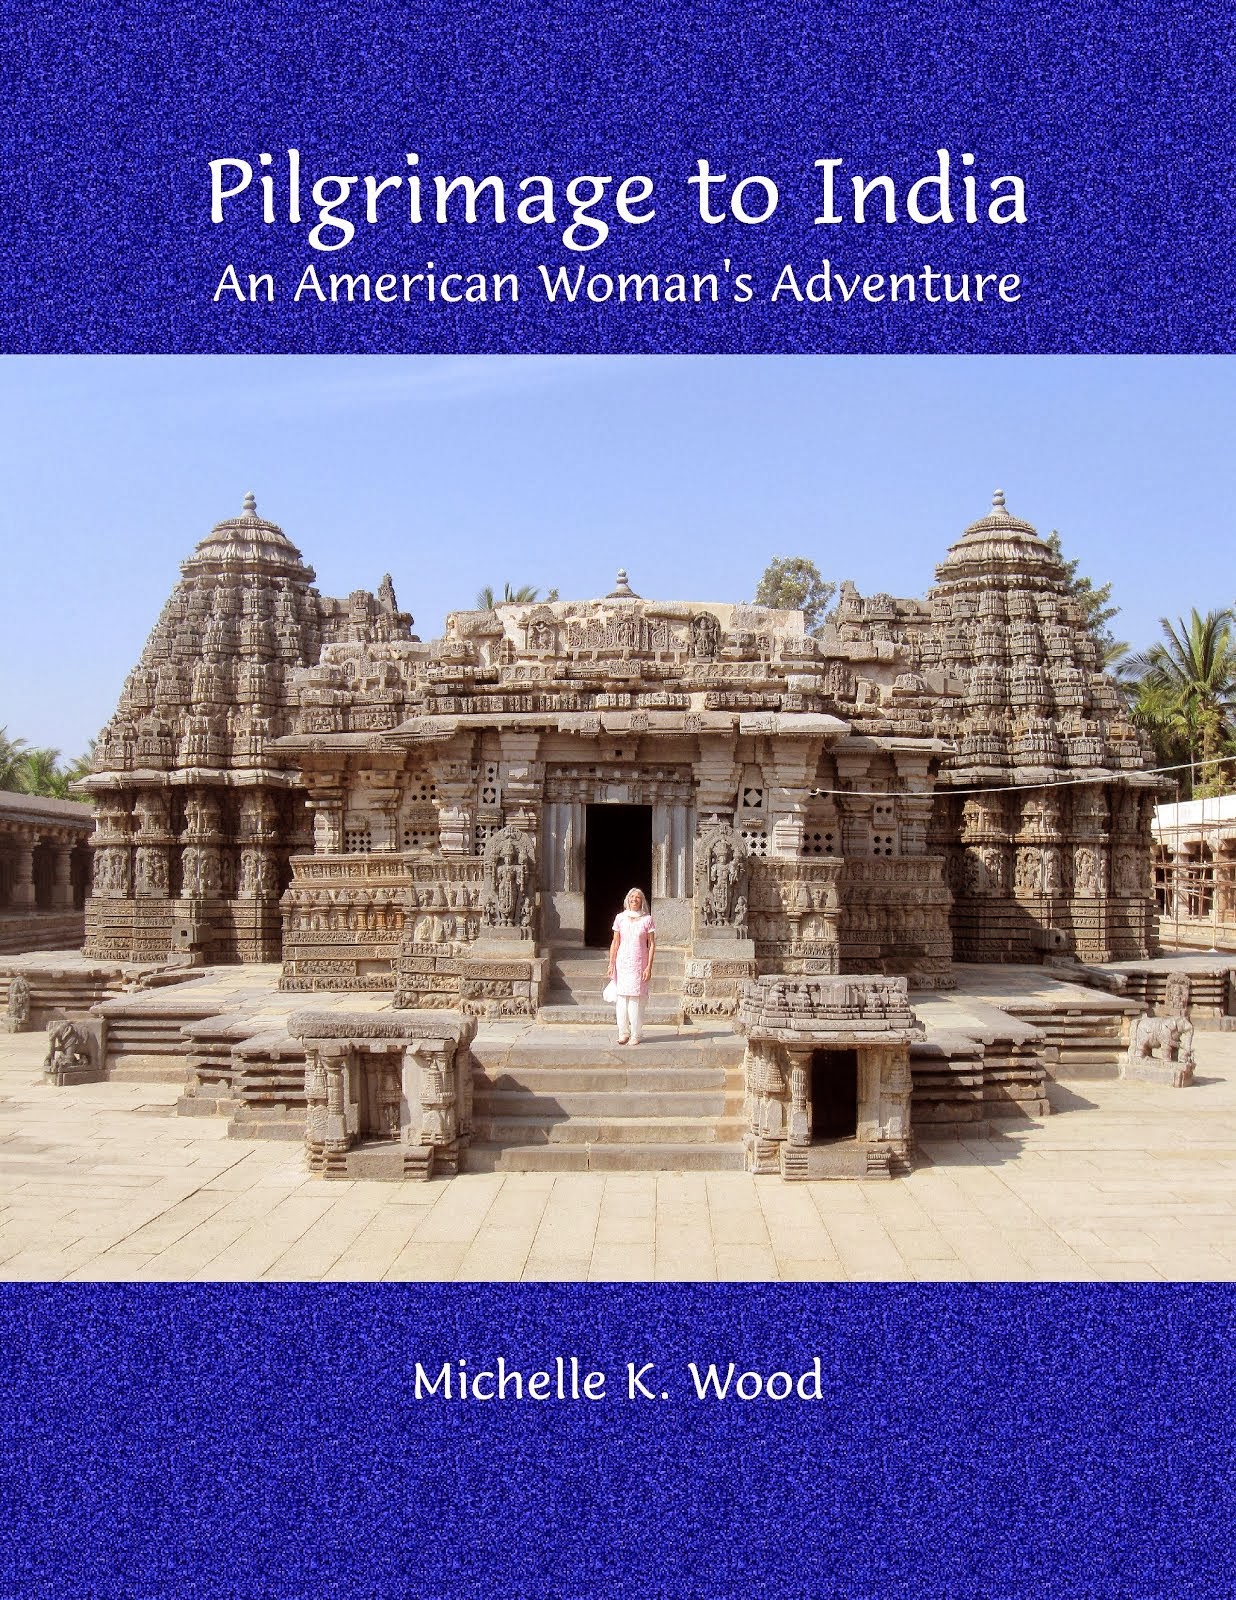 Pilgrimage To India: An American Woman's Adventure